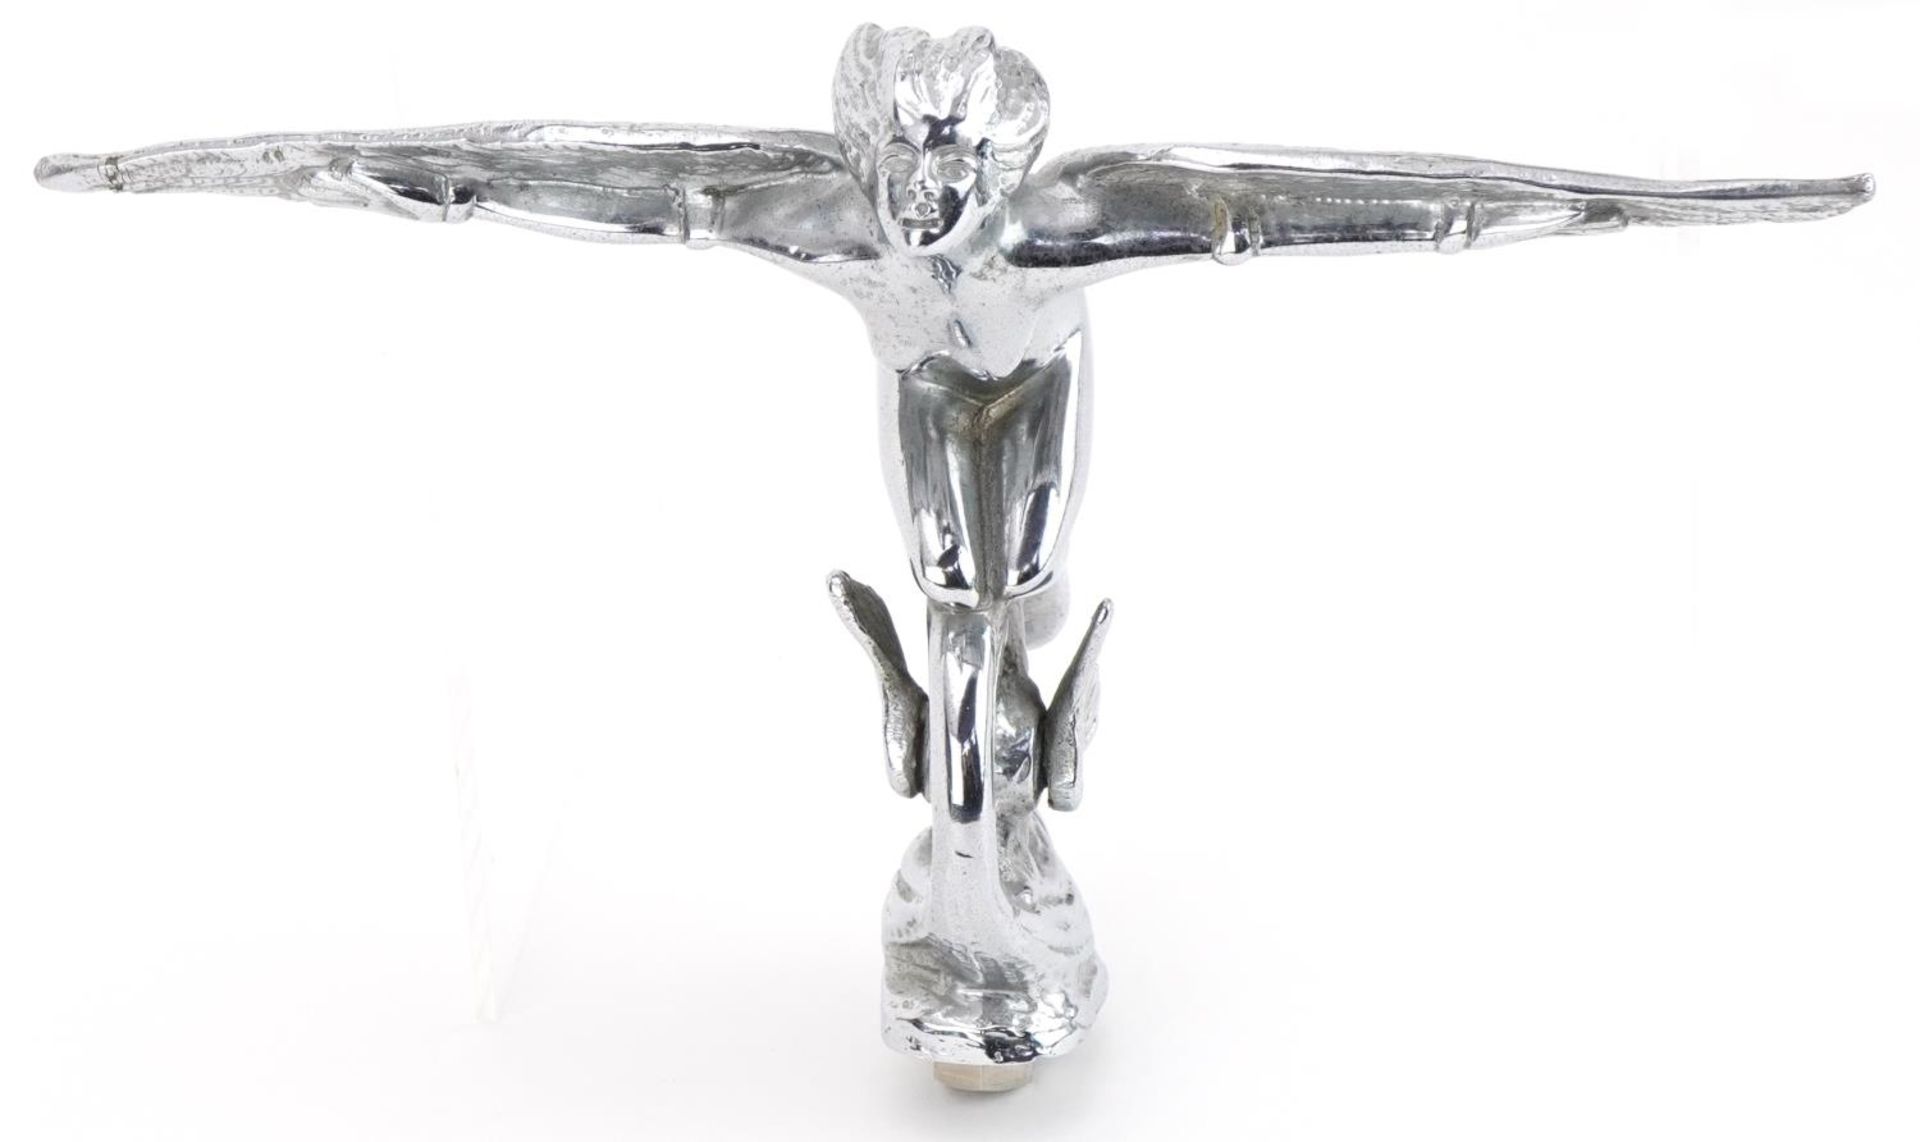 Early 20th century chrome plated car mascot in the form of a winged angel on winged wheel - Image 2 of 4